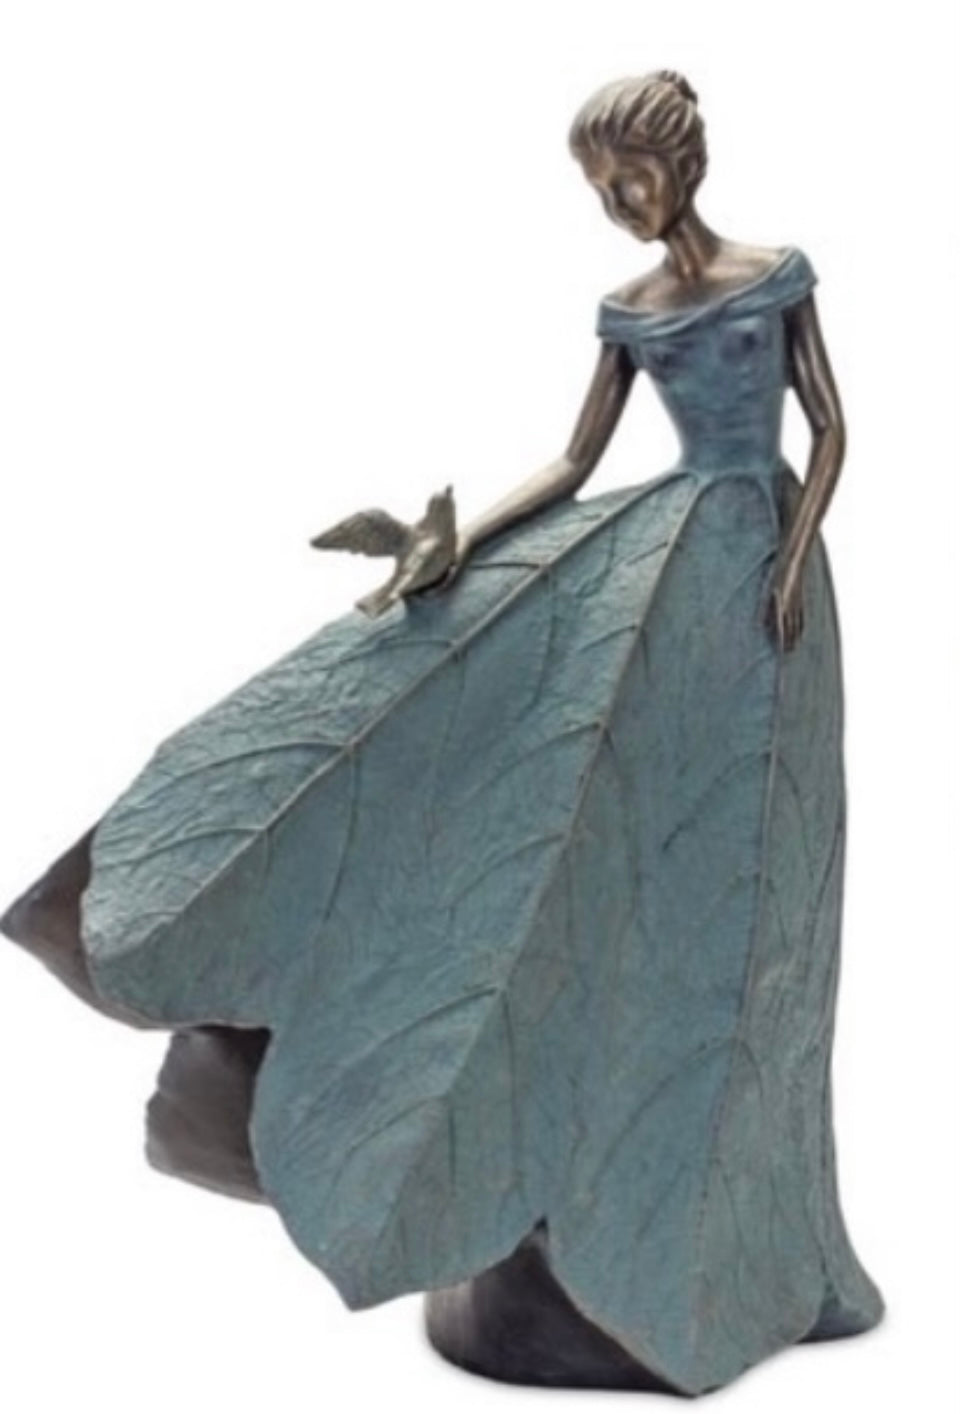 Garden Lady Figurine product image features a lady figurine in a long flowy dress.  Holding a bird on her dress.  Made of resin.  Bronze and patina color.  19.25"H.  Available to ship immediately.  